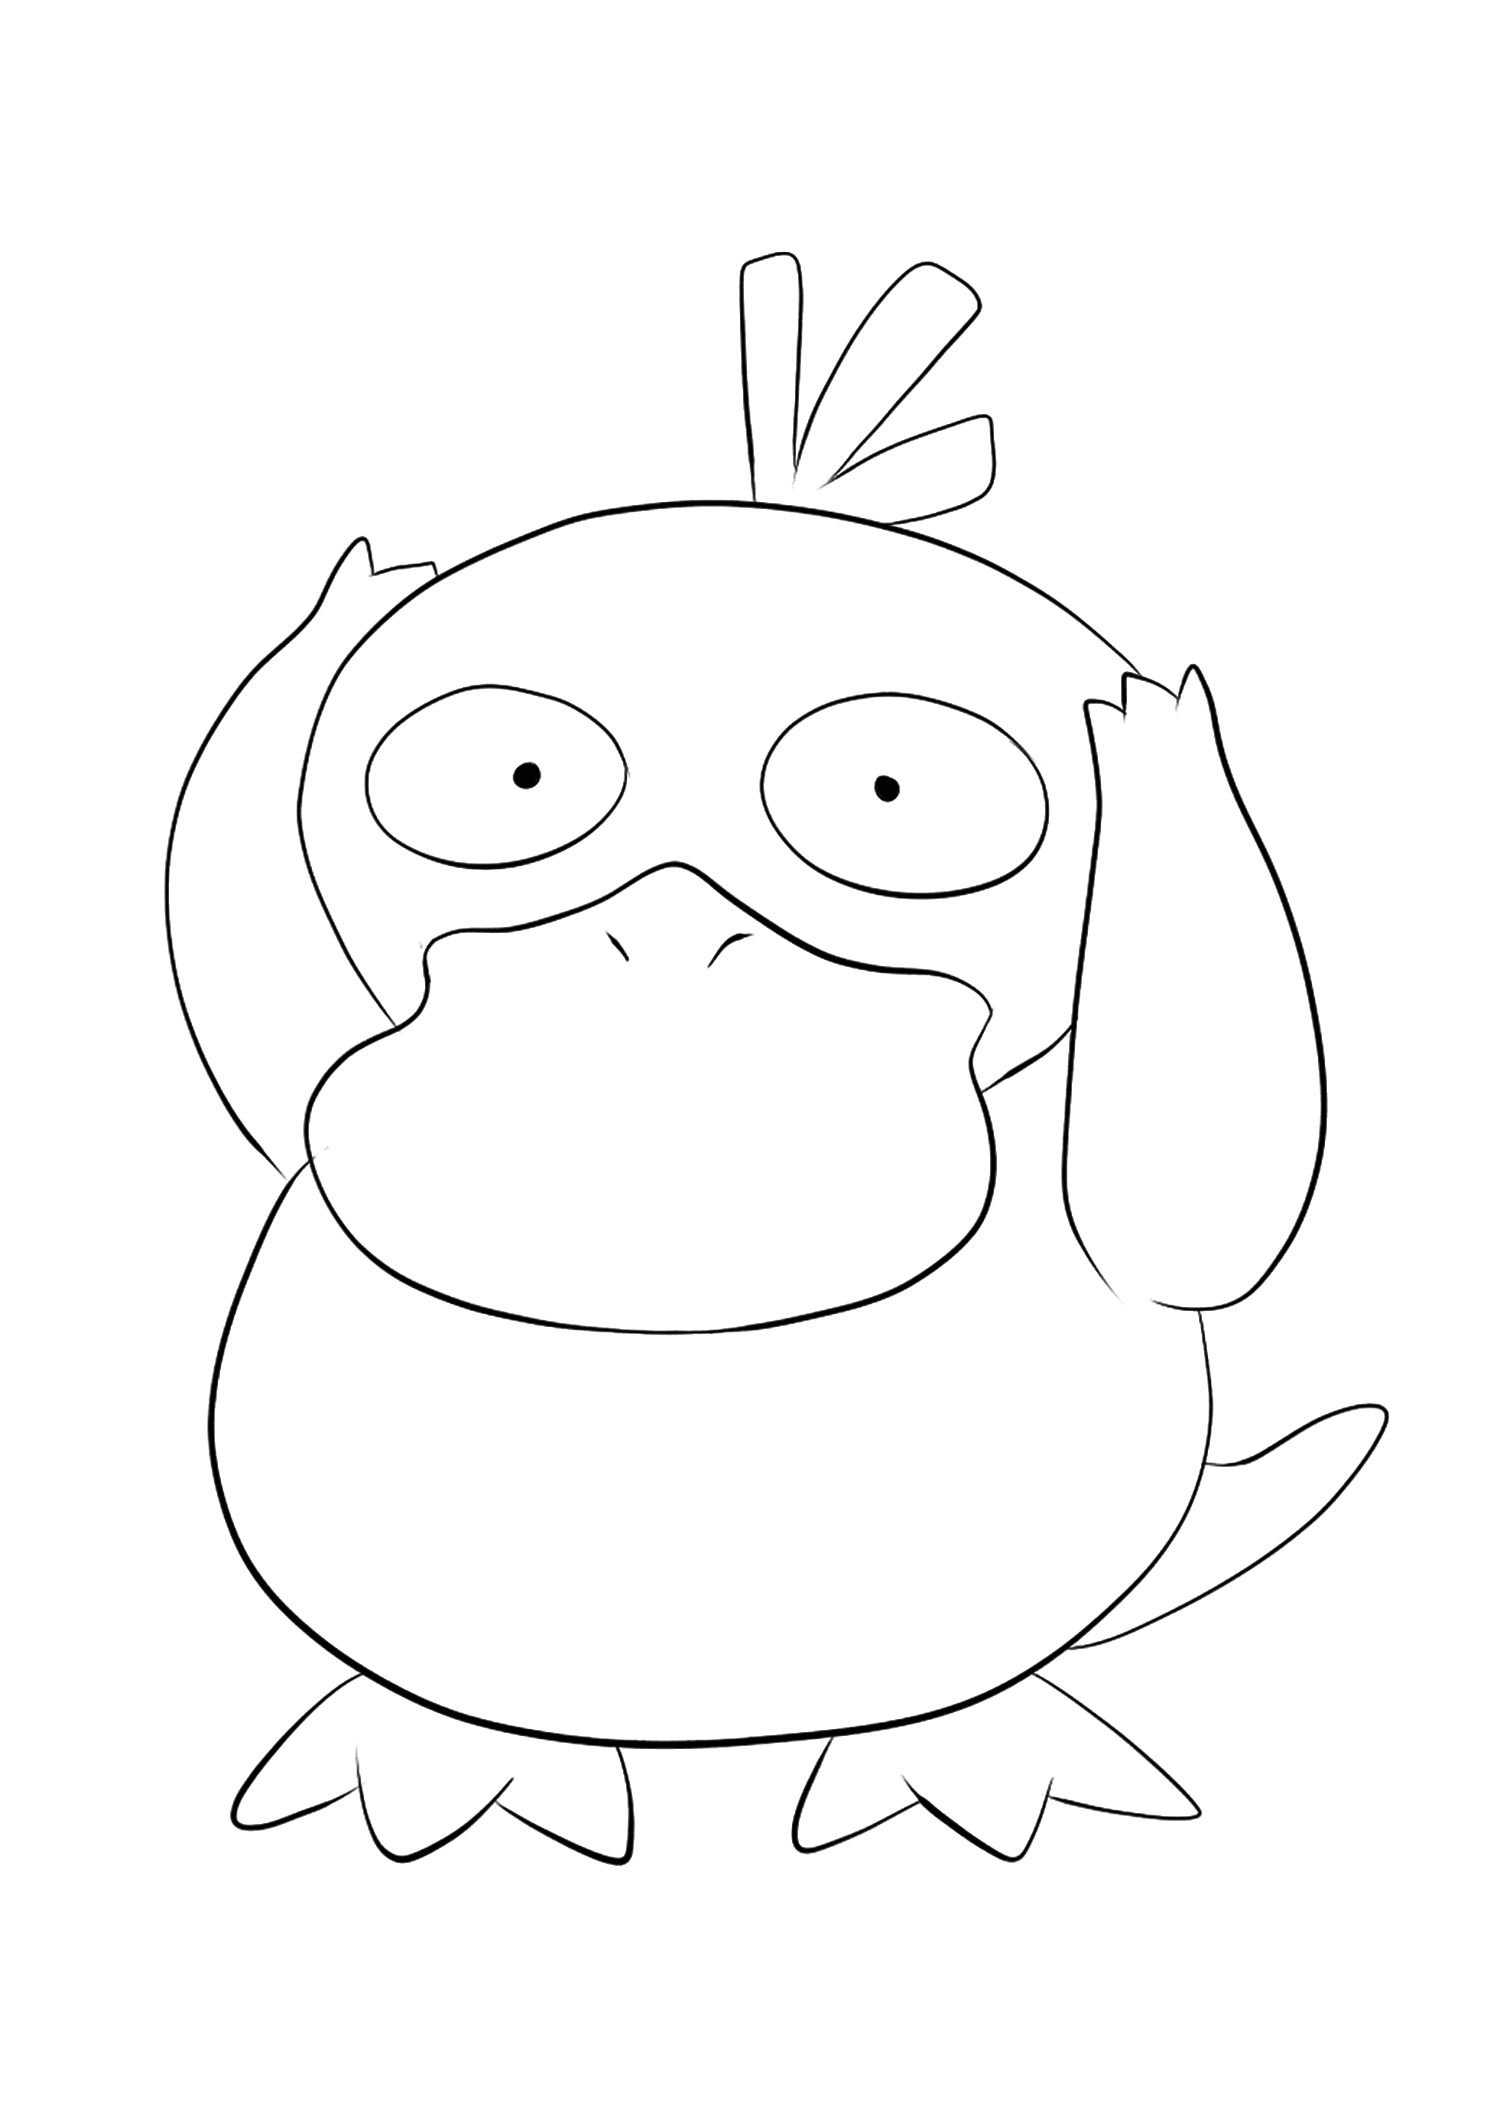 Psyduck (No.54) : Pokemon (Generation I) - All Pokemon coloring pages